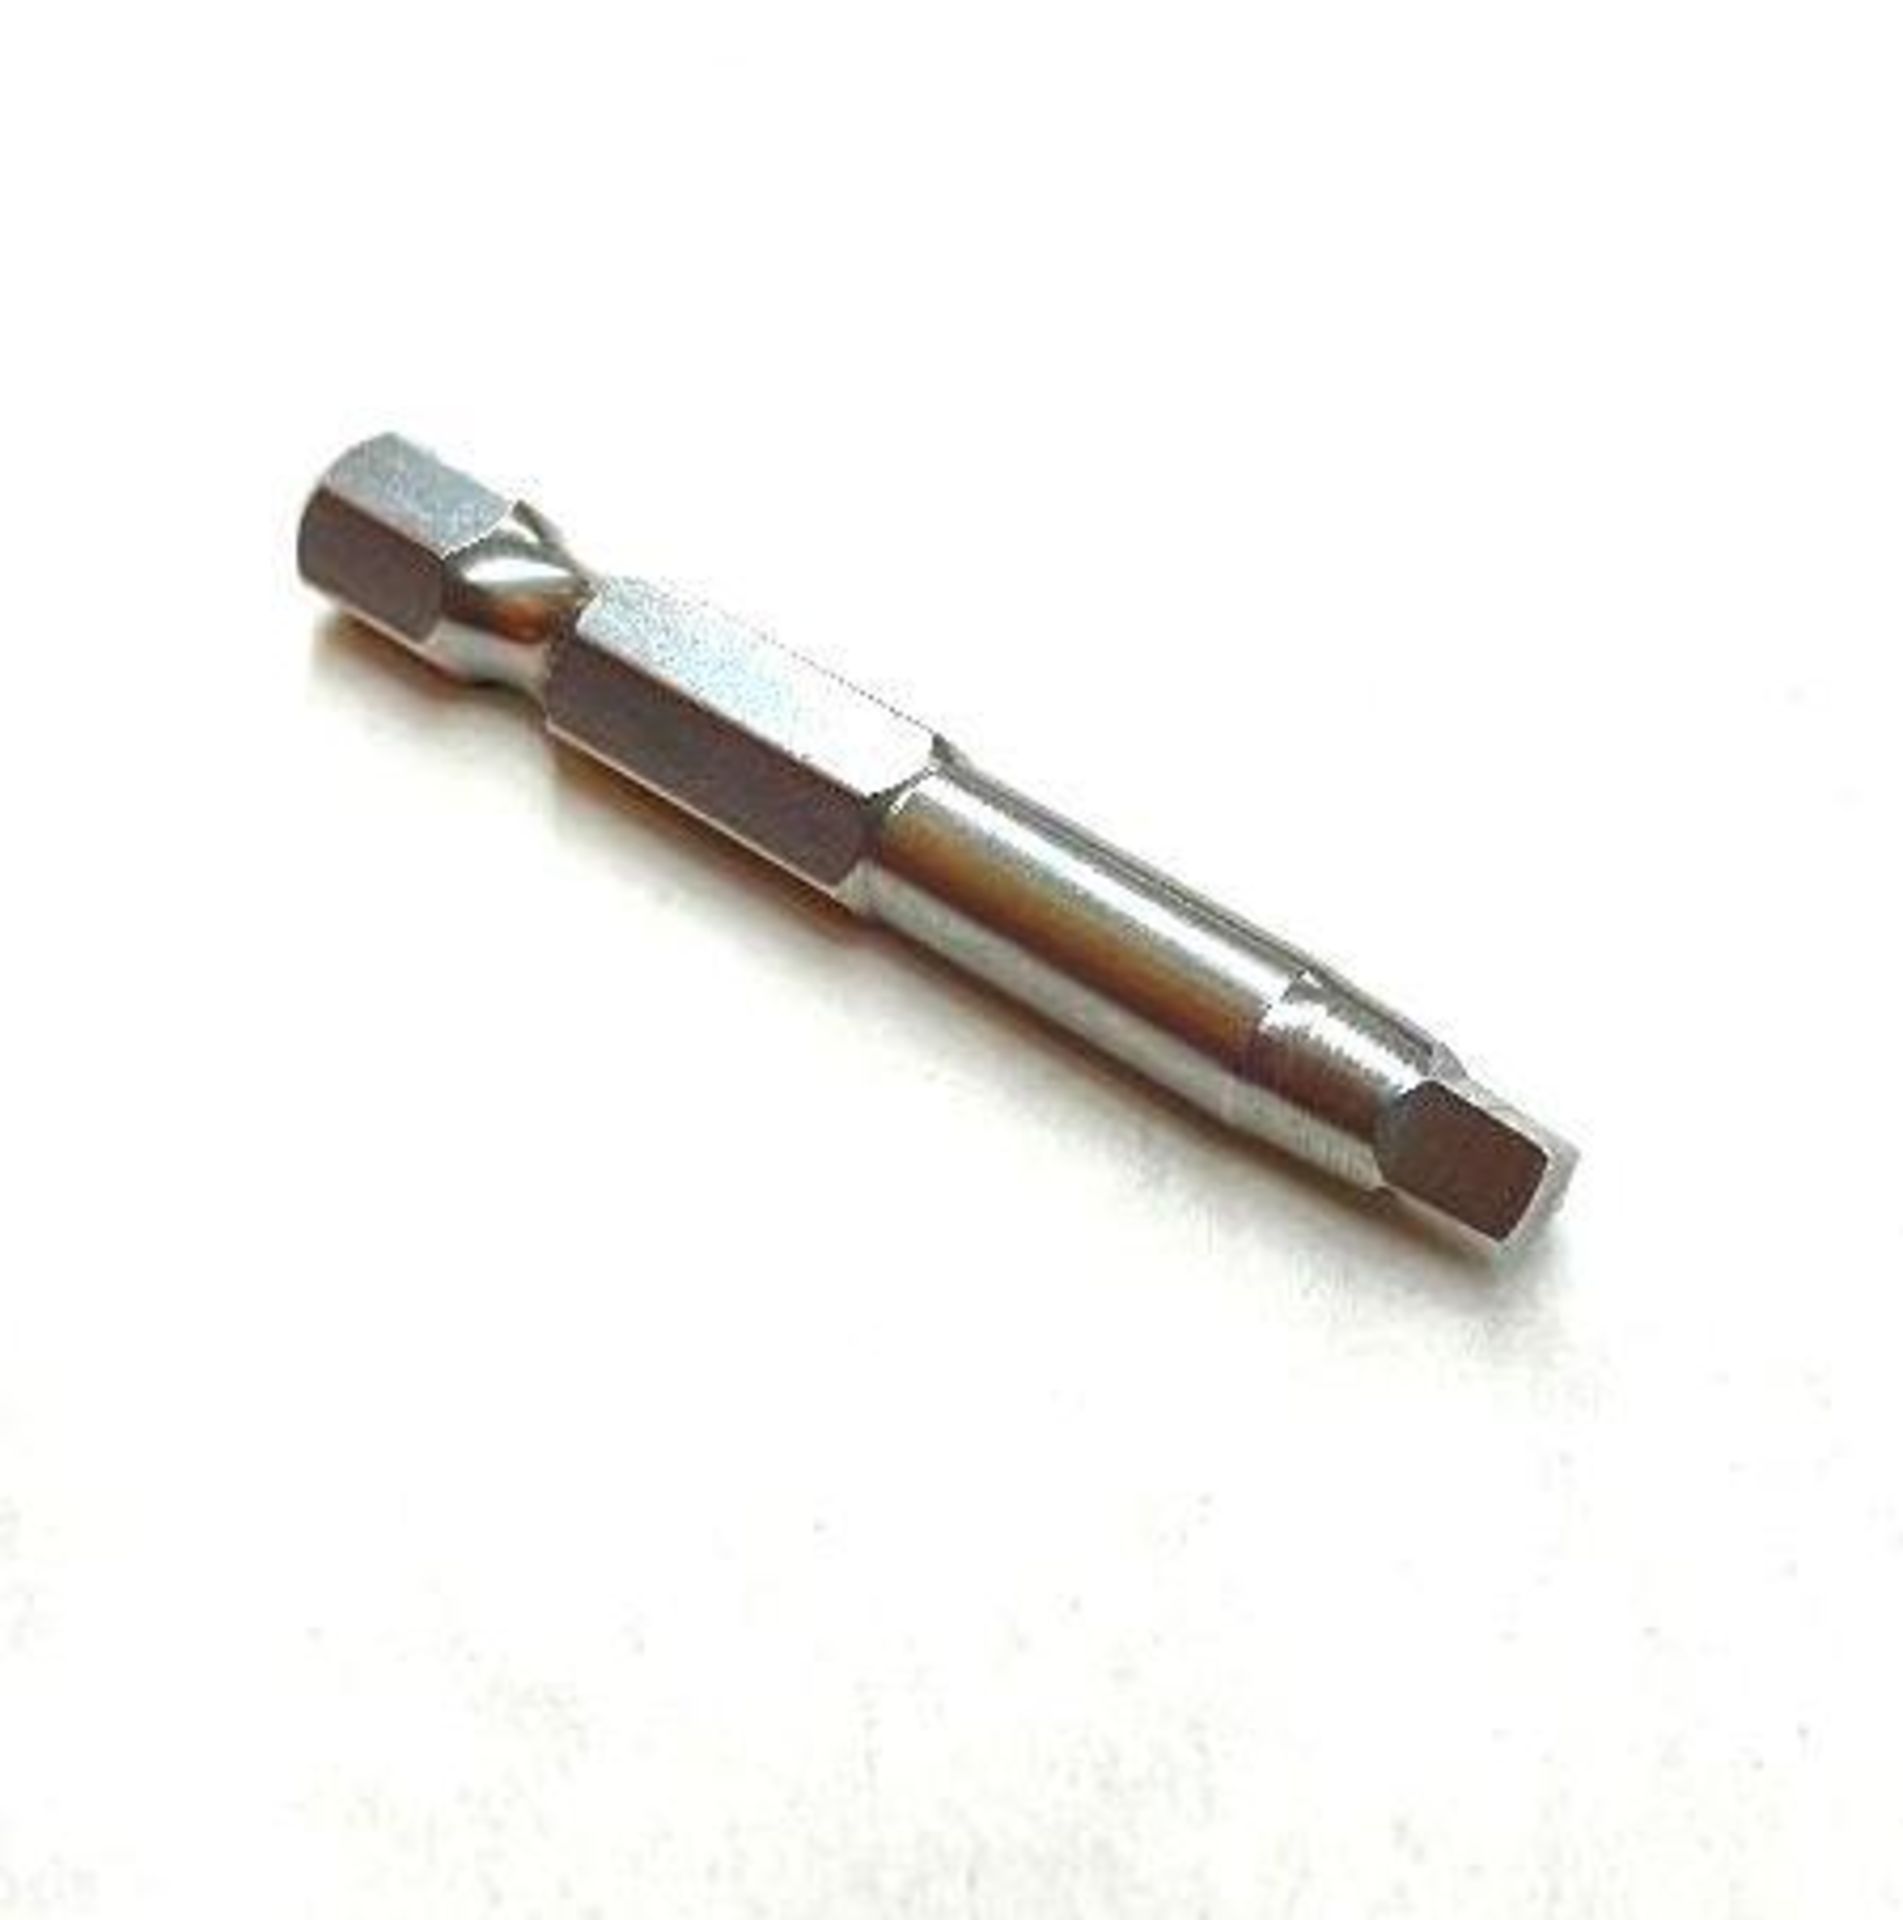 (4000) SQUARE RECESS 1/4" HEX POWER BIT, R3, 2" LONG BRAND/MODEL EAZYPOWER 32102 RETAIL PRICE (TOTAL